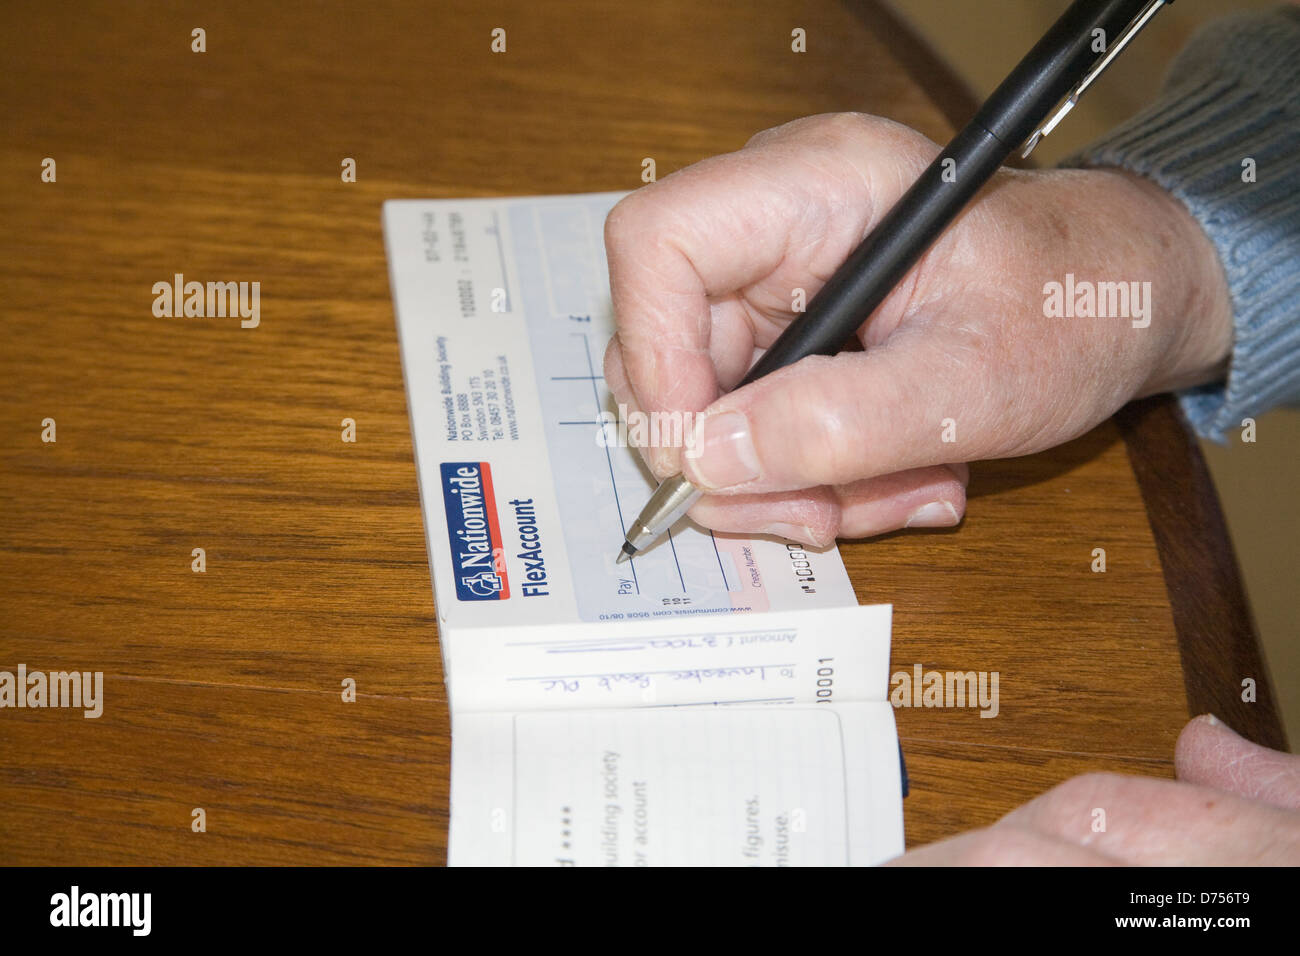 UK Elderly woman sitting at table writing a Nationwide cheque